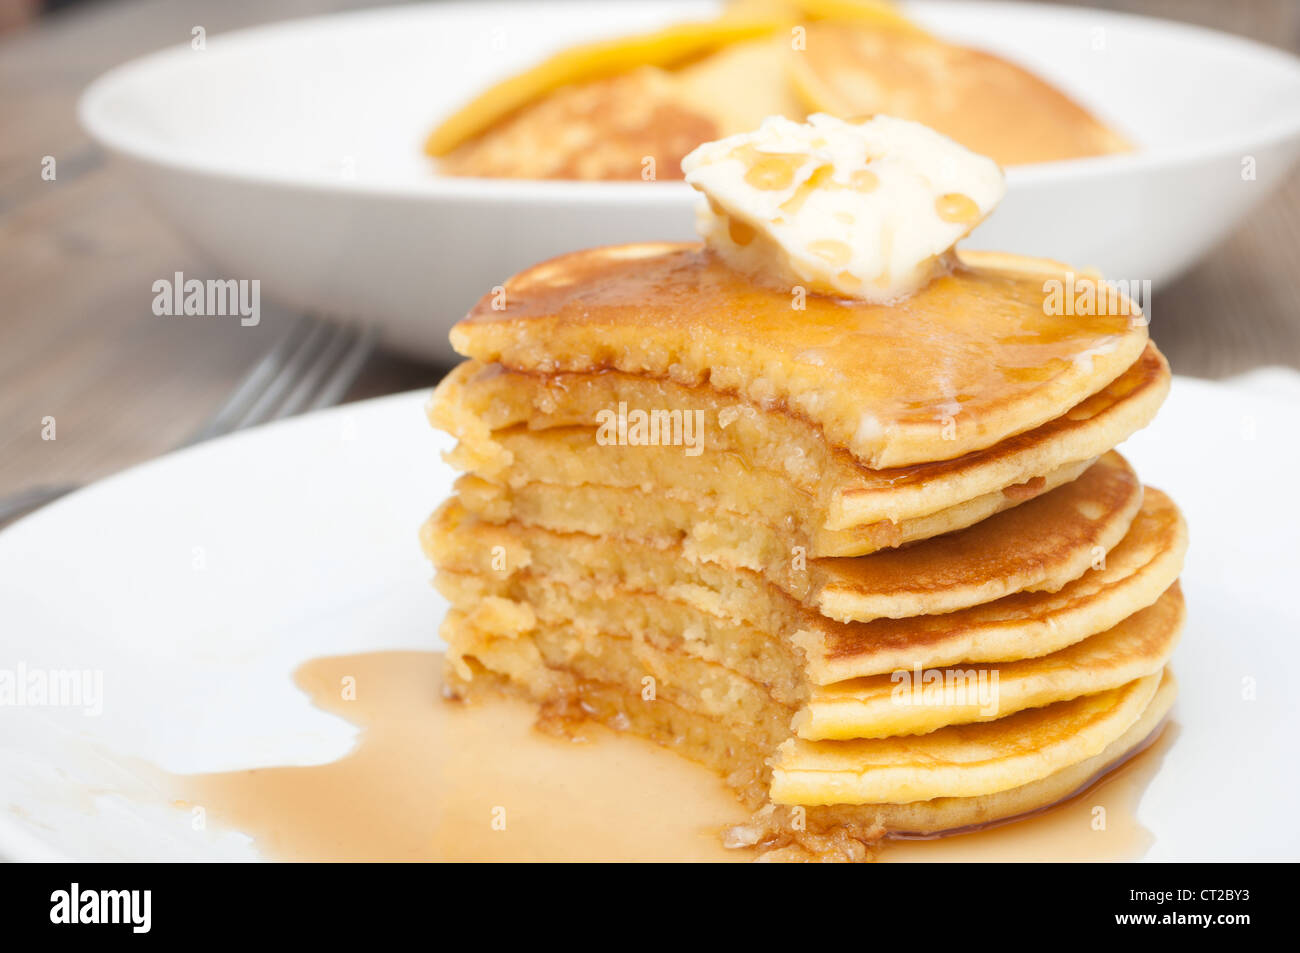 Homemade Pancakes With Butter and Warm Maple Syrup Stock Photo